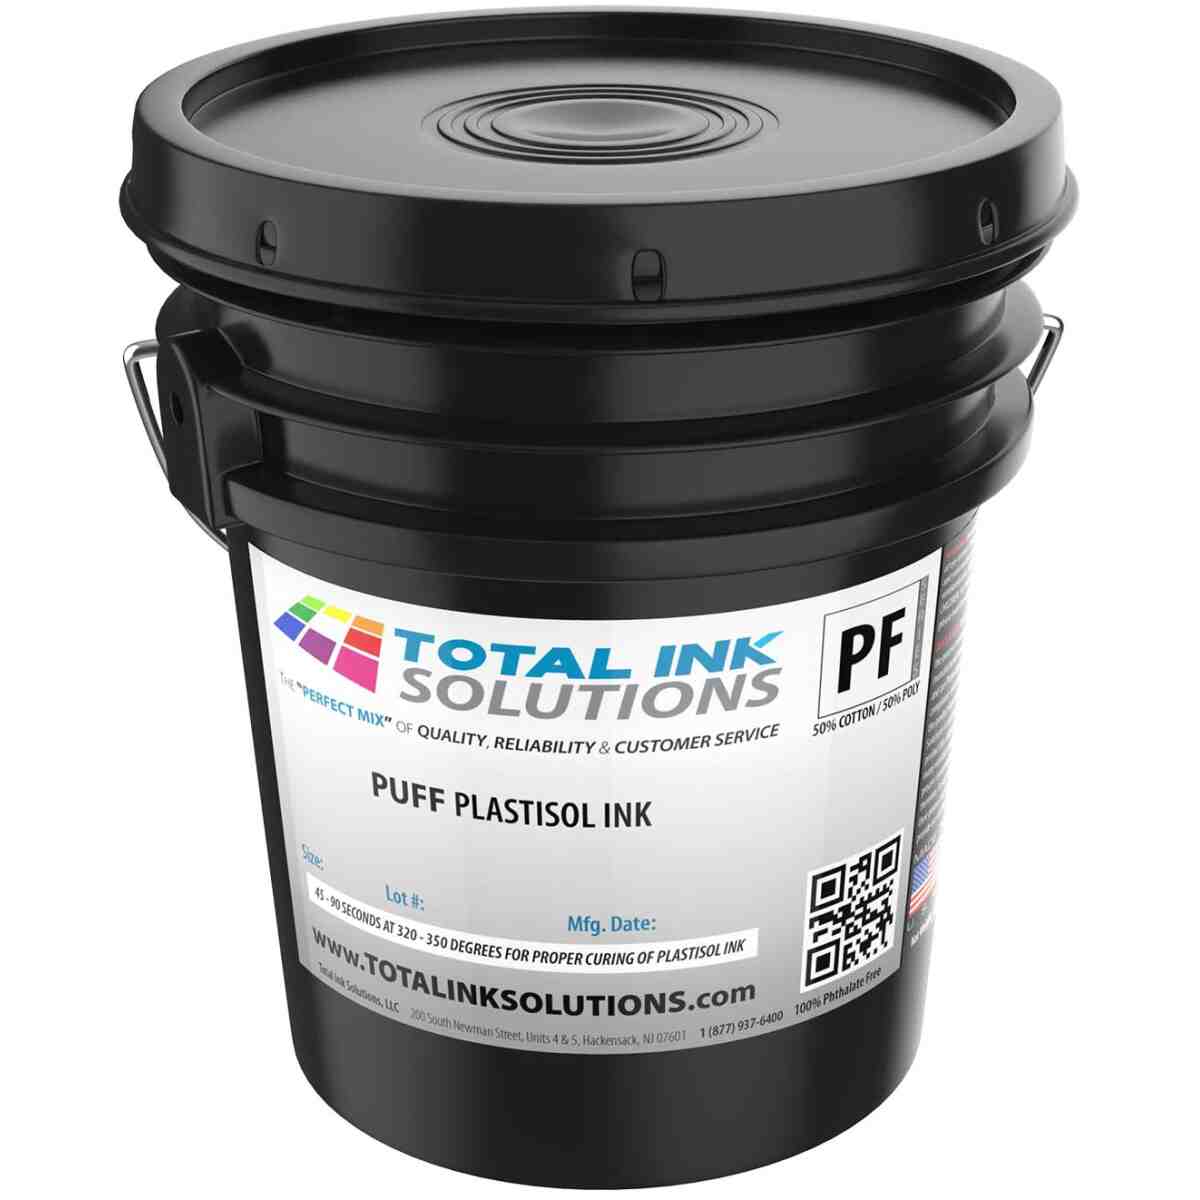 Puff Plastisol Ink - 5 Gallon TOTAL INK SOLUTIONS®